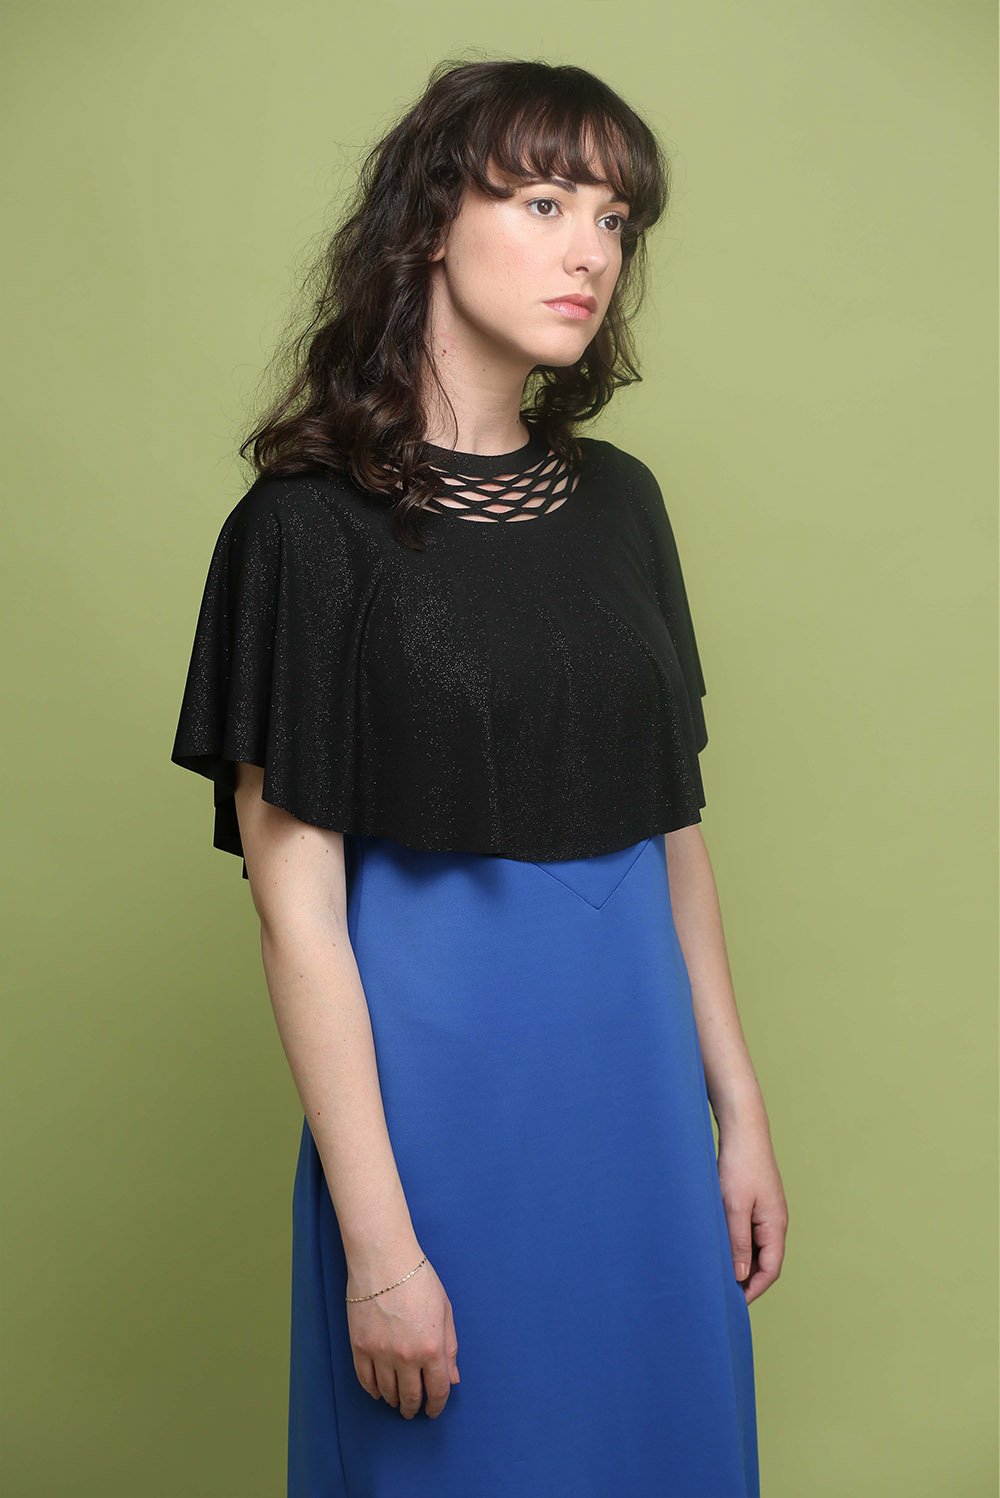 Top for the event - a sparkling black top for the evening with a chain trim